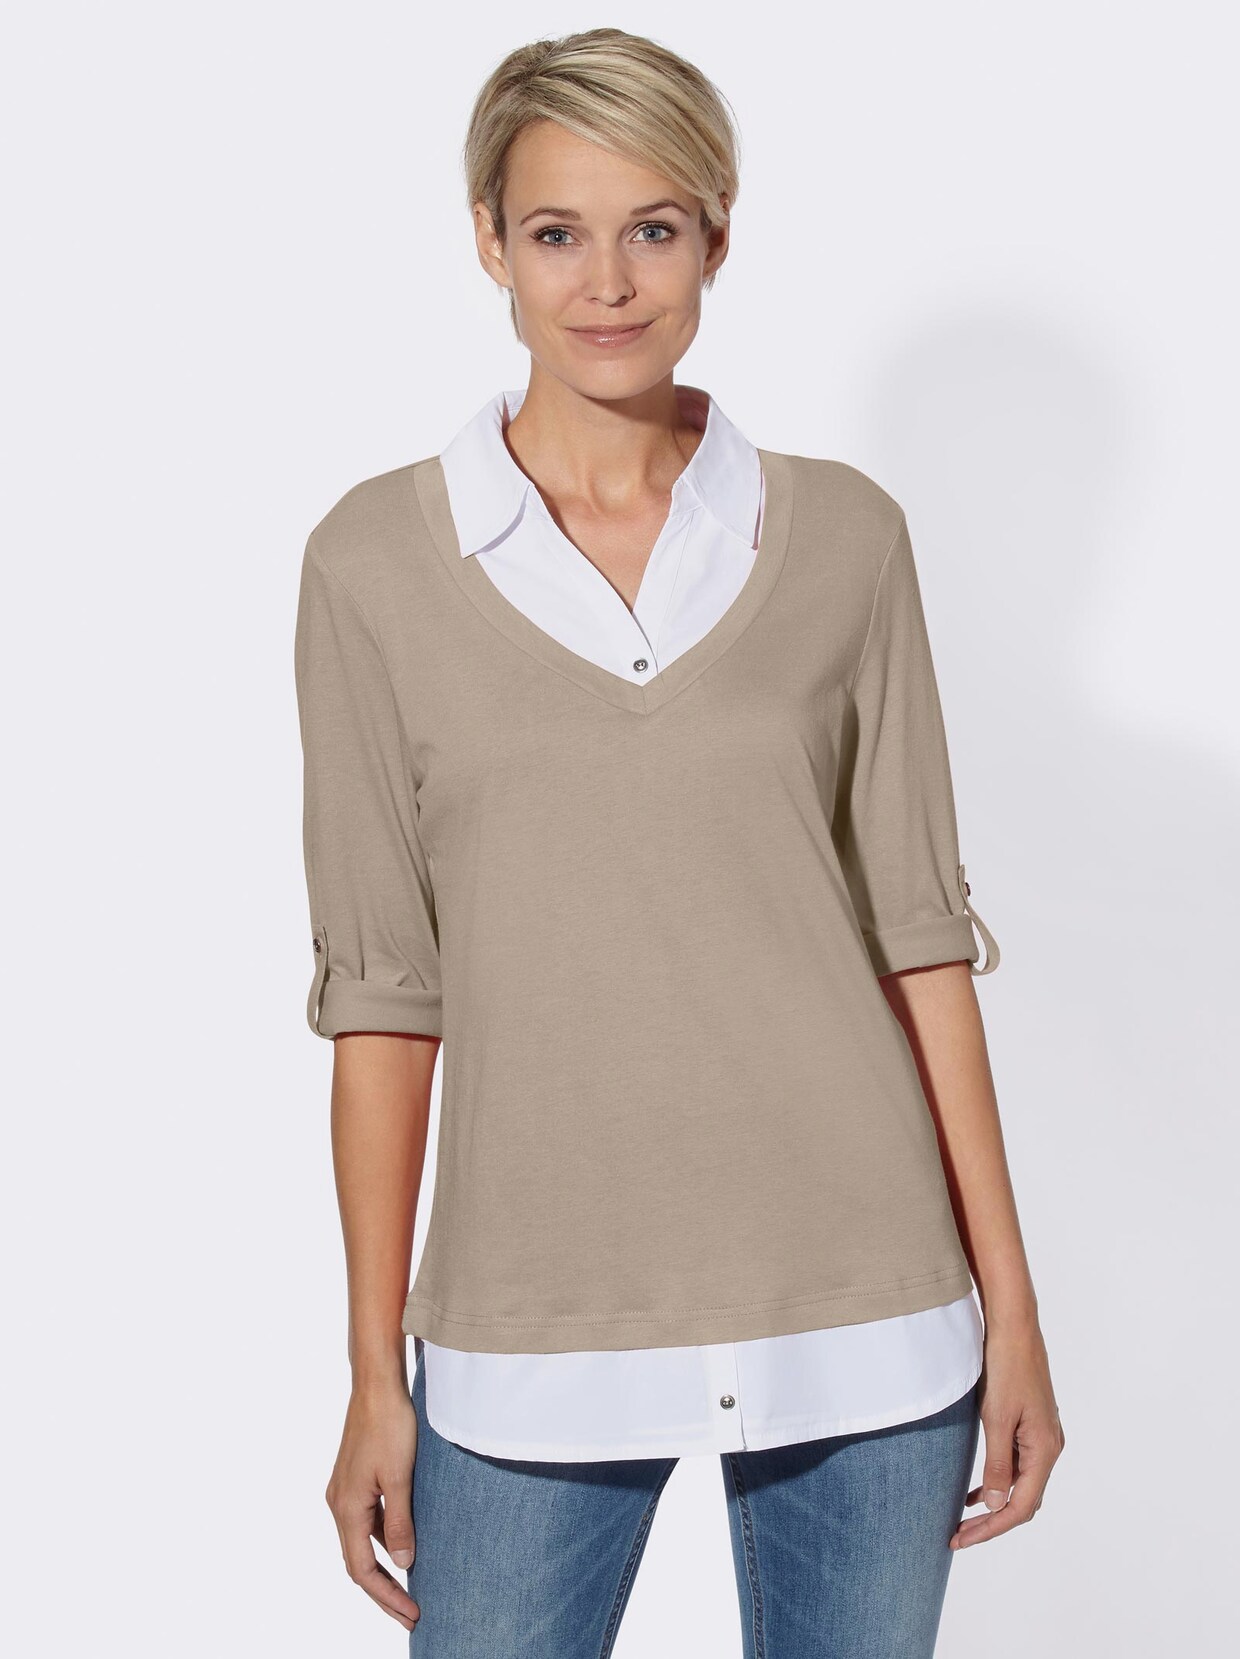 2-in-1-Shirt - taupe-weiß